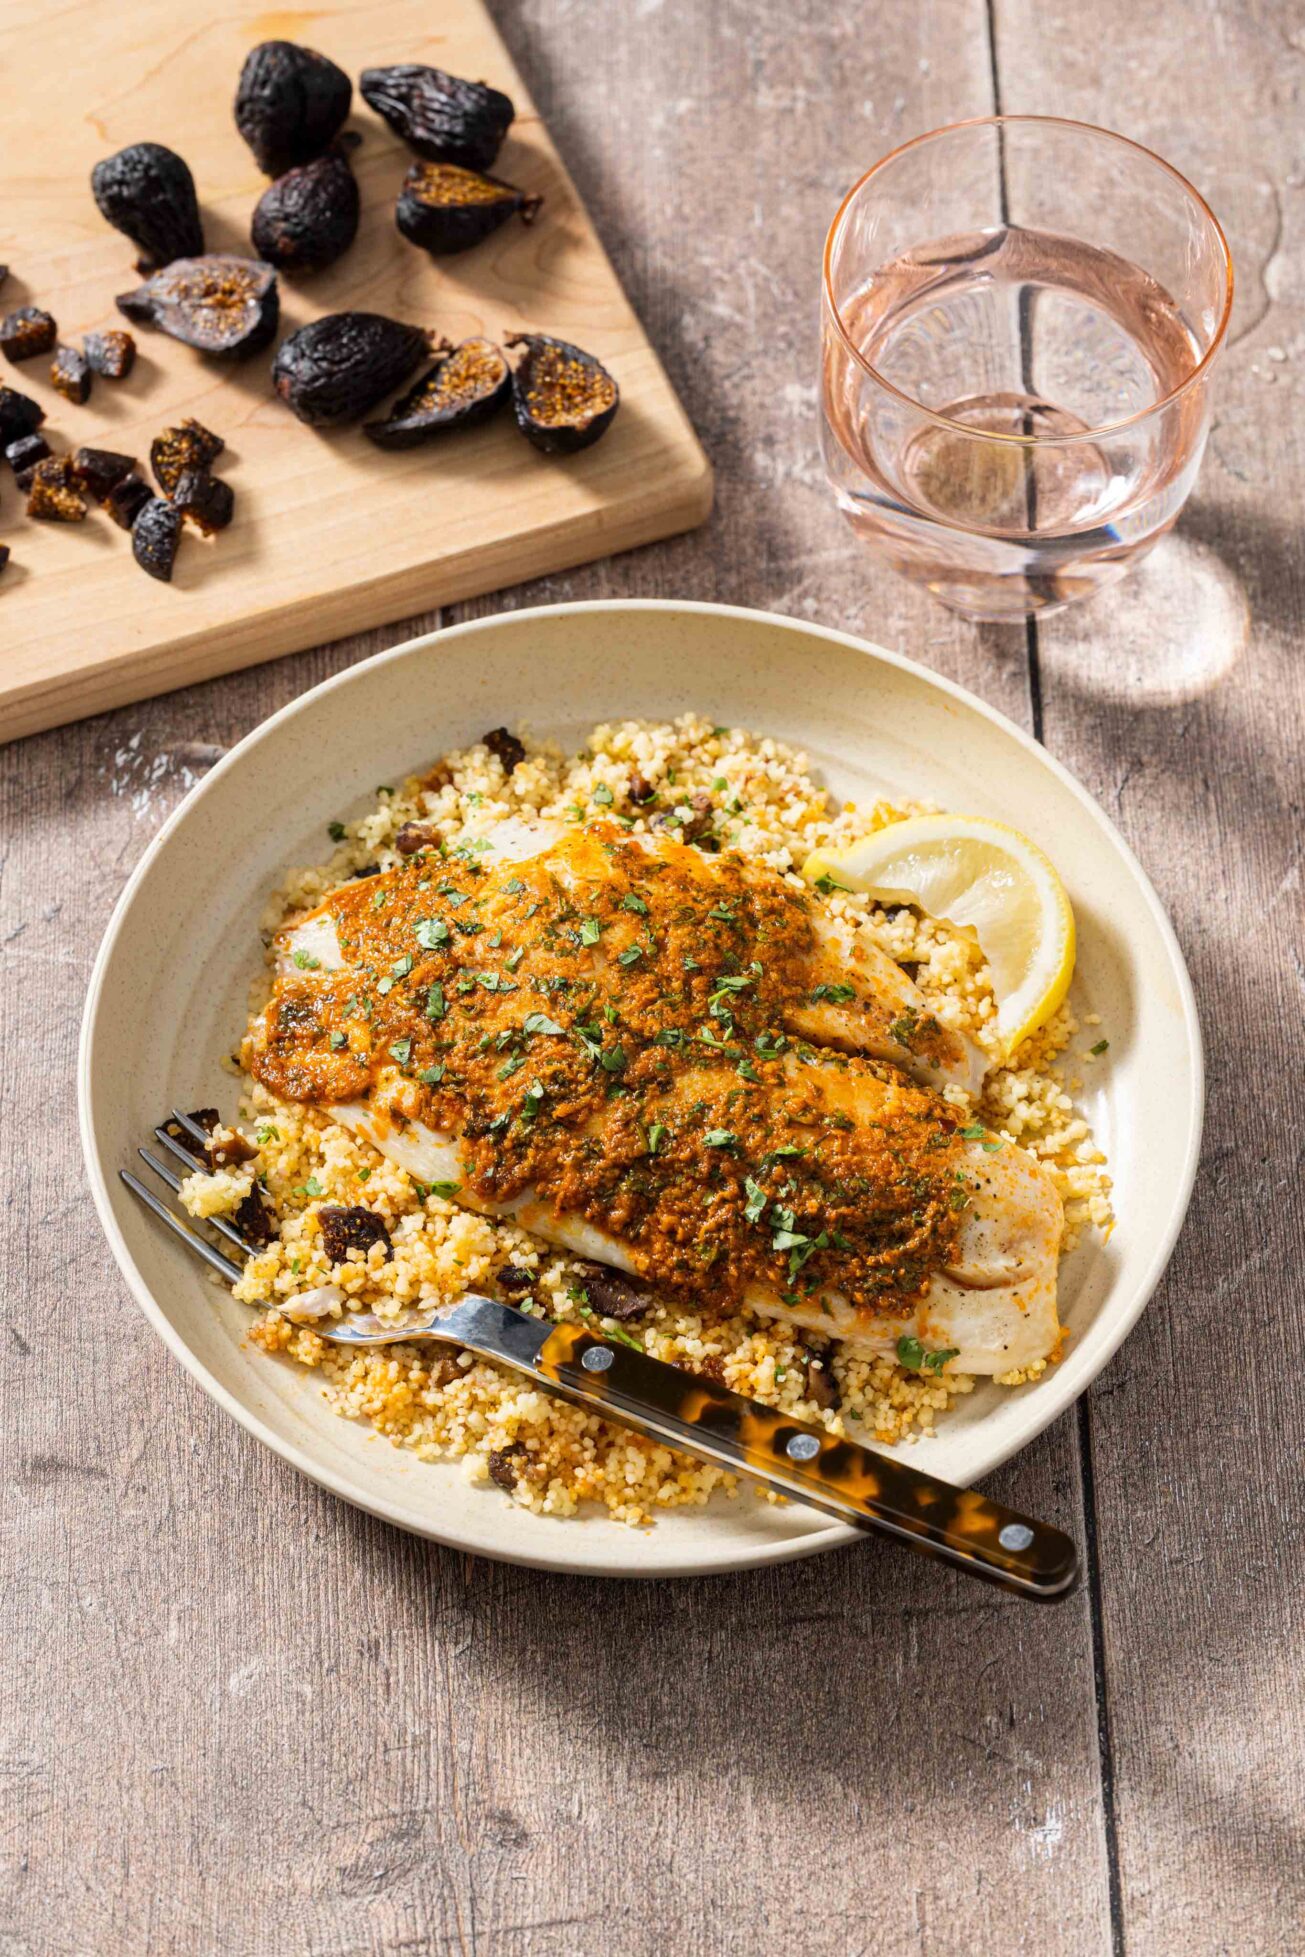 morroccan fish couscous packets with figs in chermoula spice